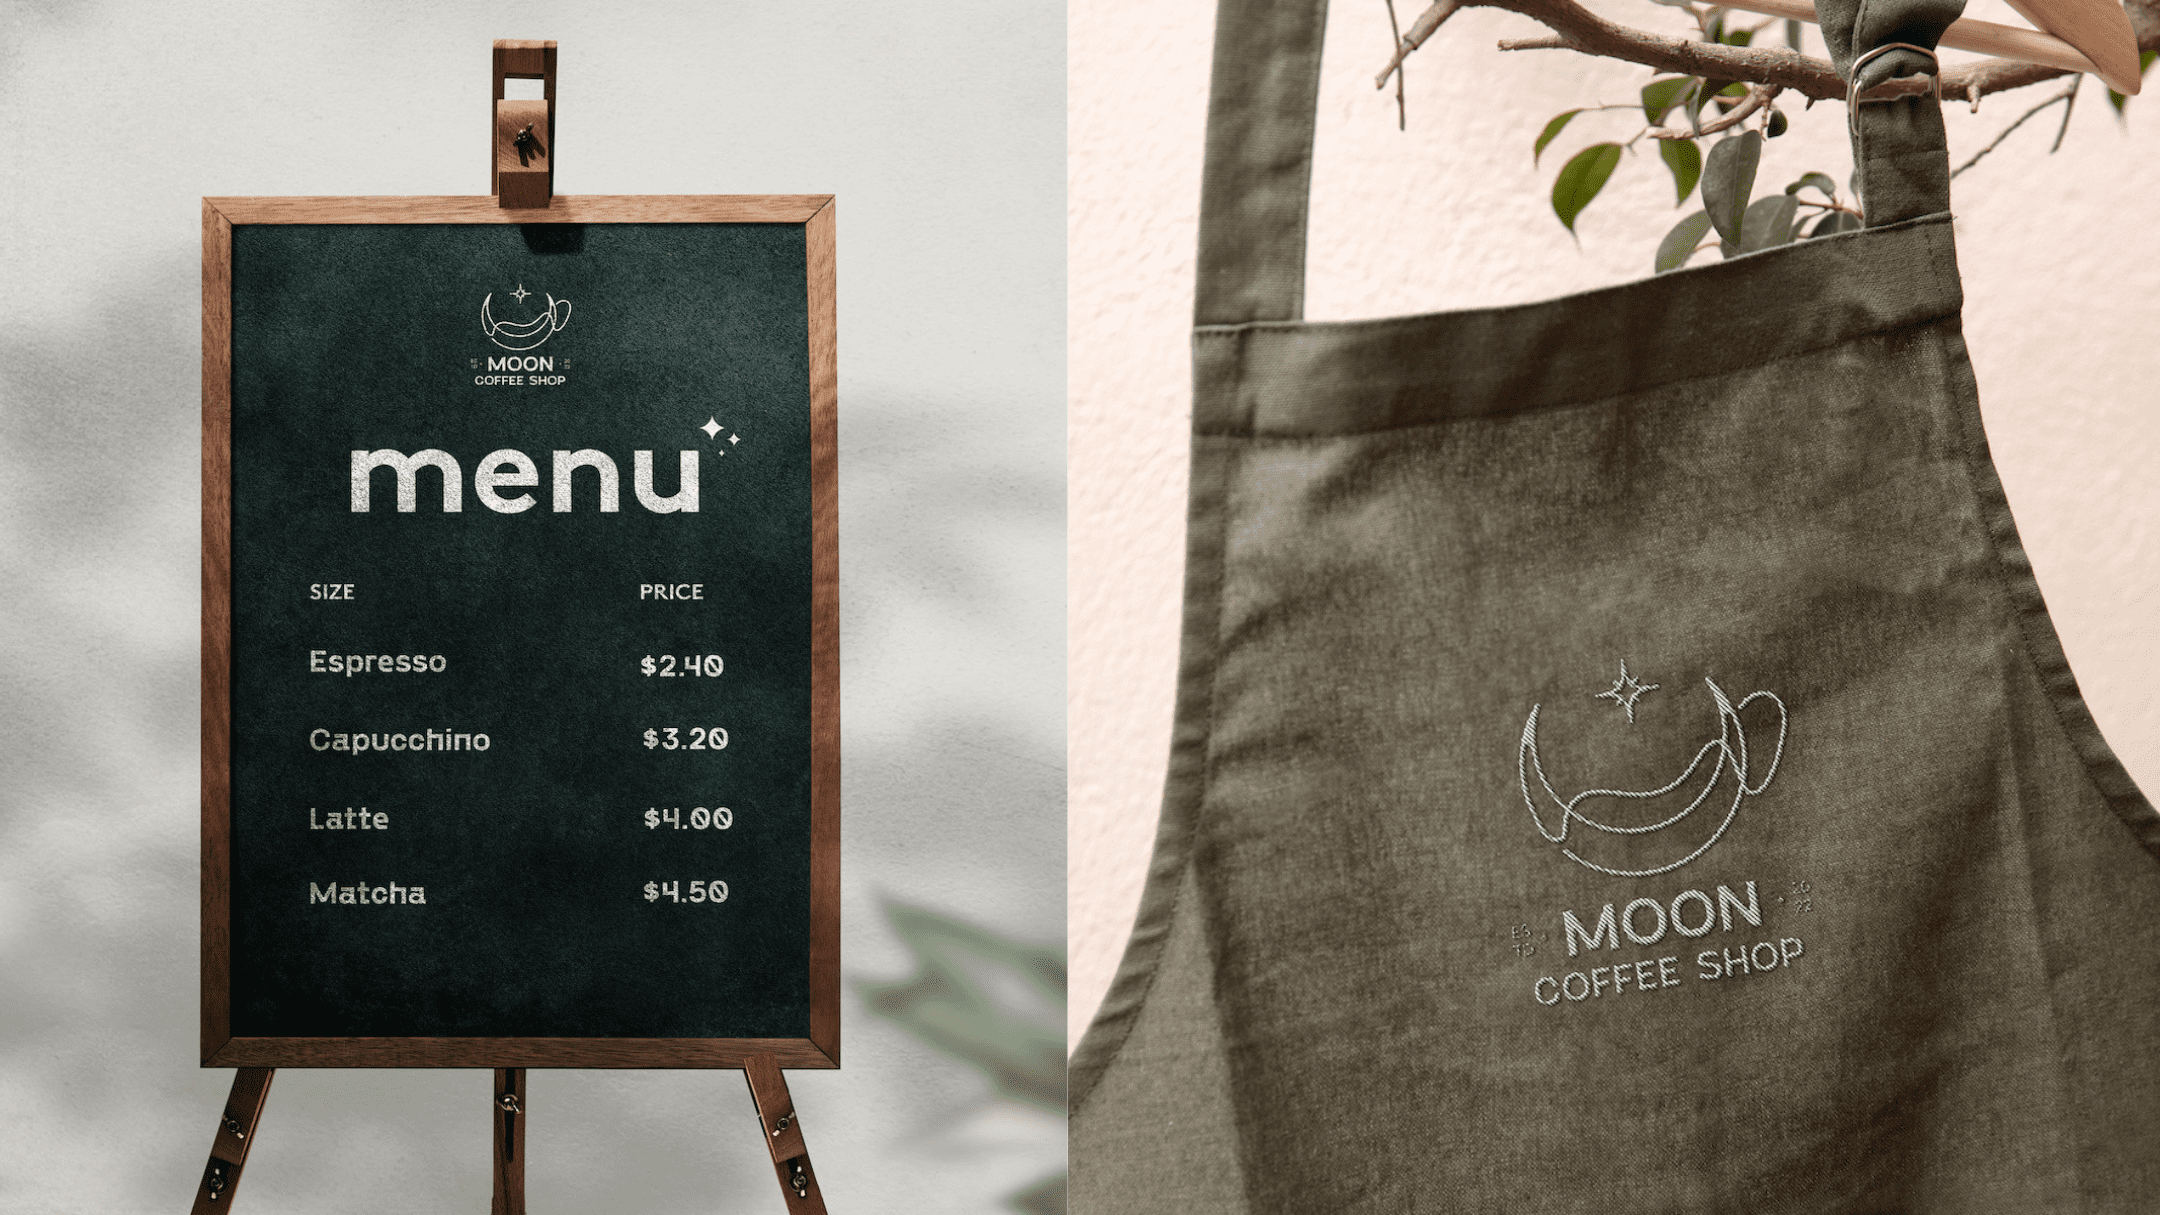 coffee shop chalkboard menu and apron with brand name and logo